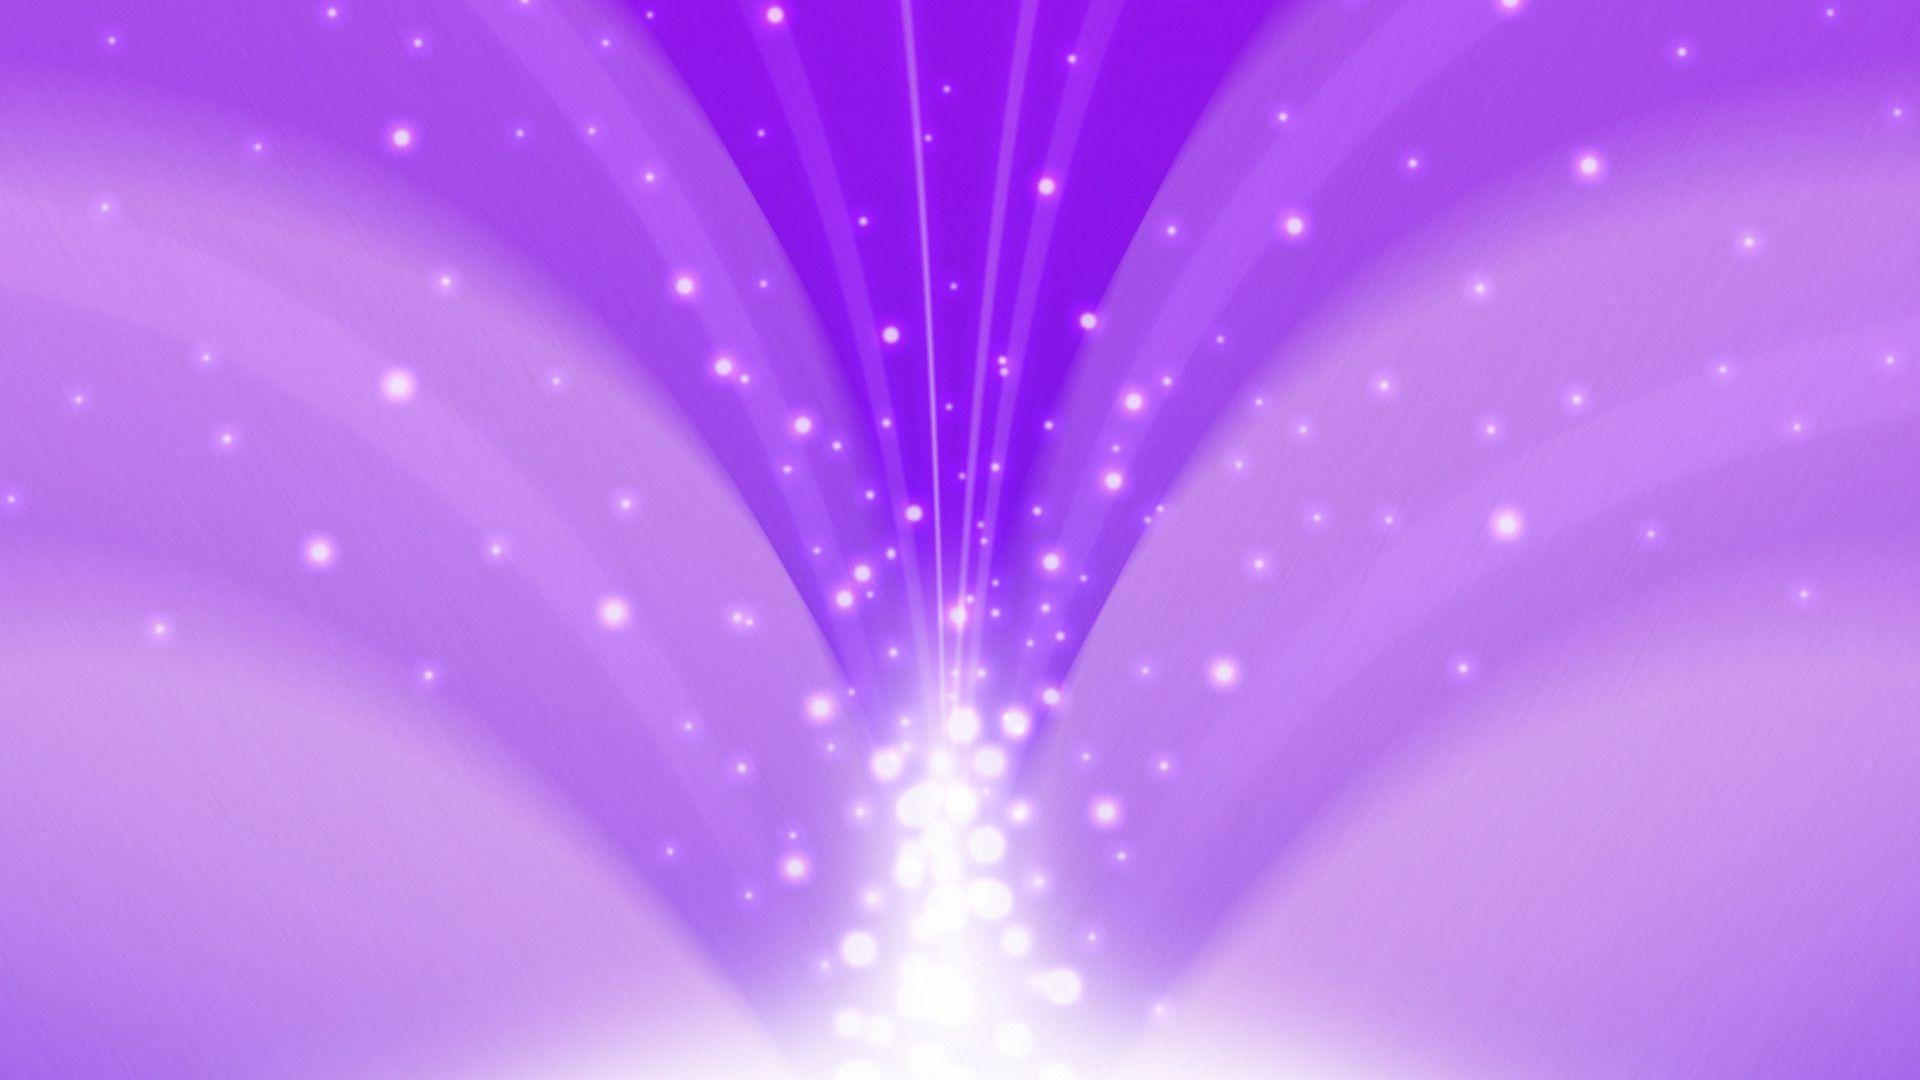 Simple Light Purple Background HD Image 3 HD Wallpaper. Hdimges